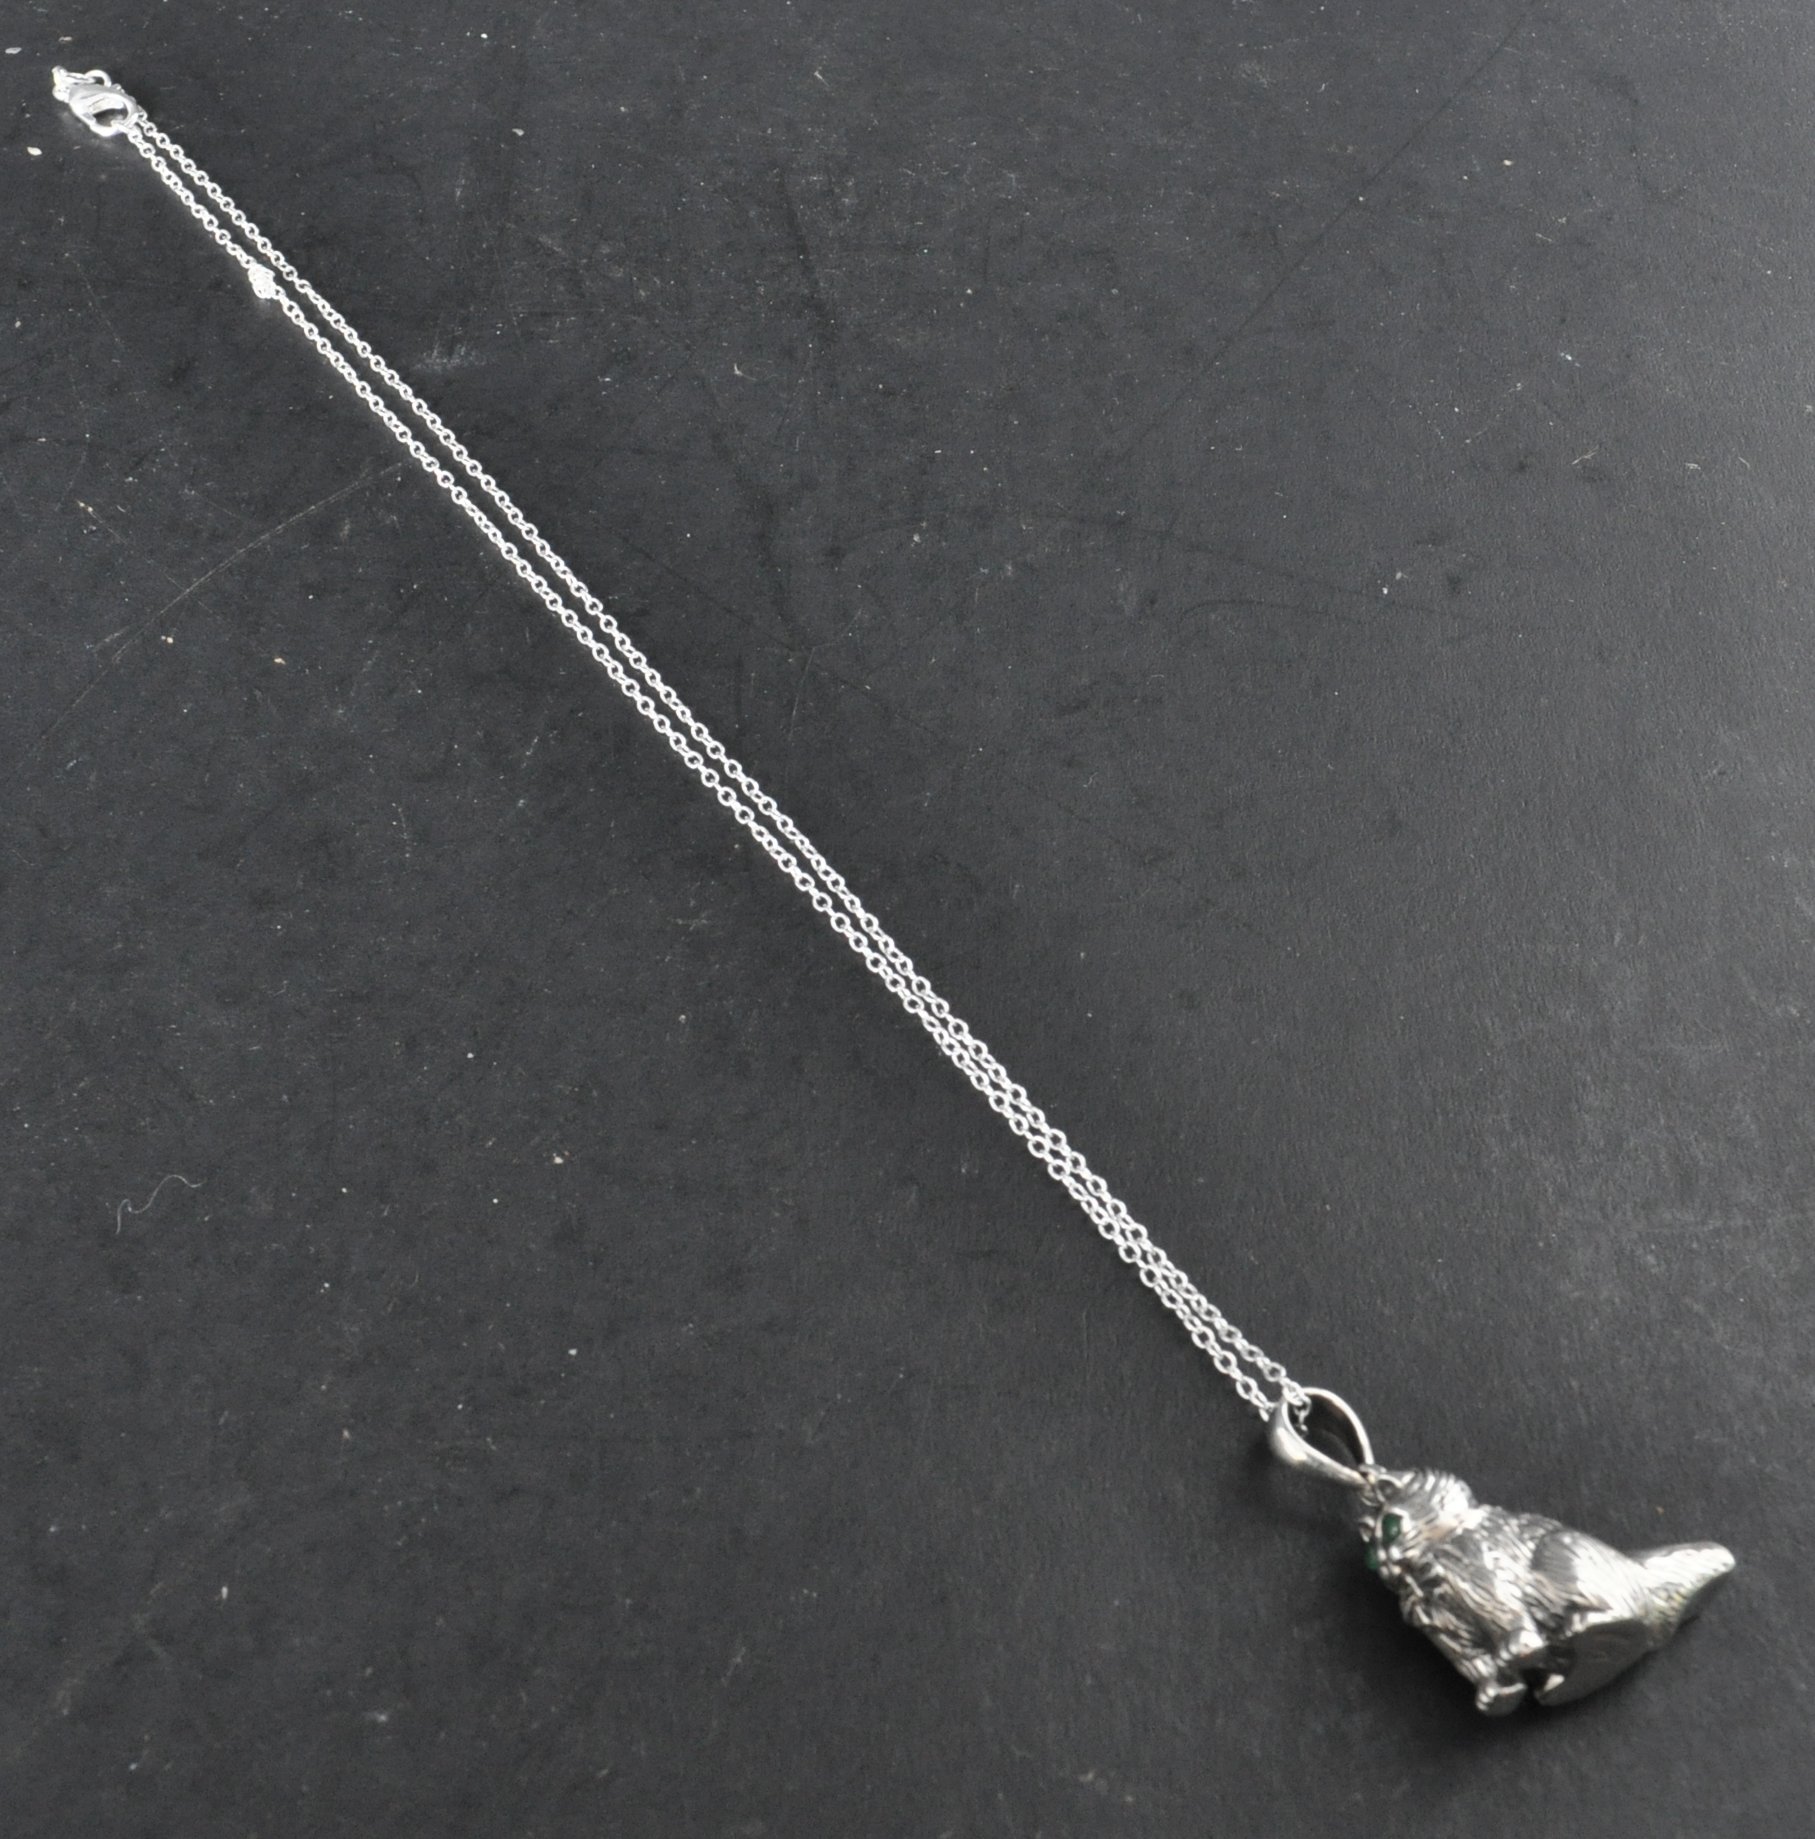 SILVER WHISTLE PENDANT IN THE FORM OF A CAT - Image 3 of 5